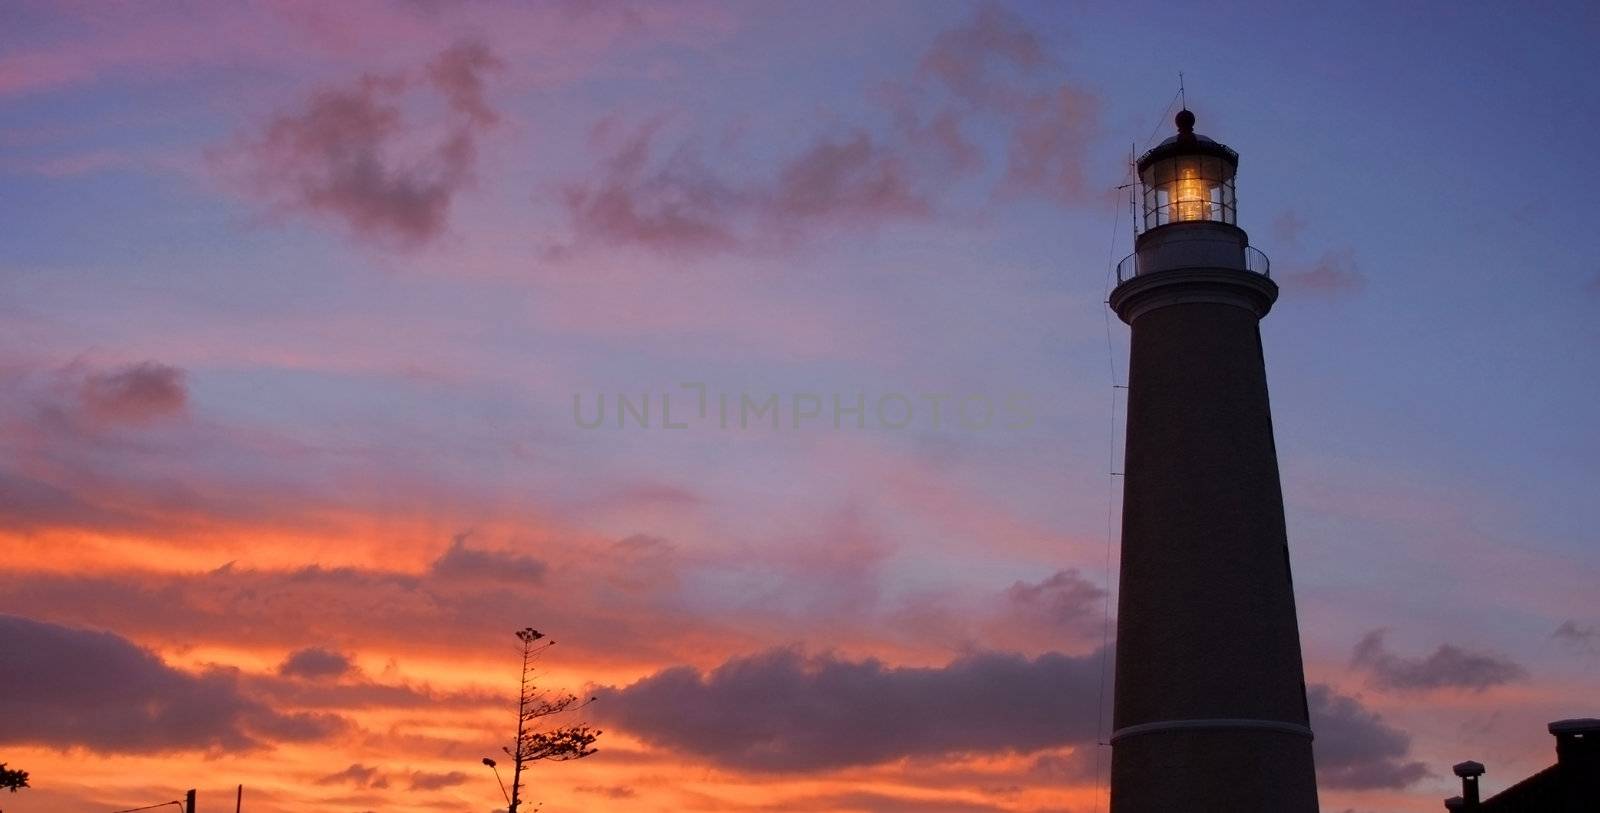 Lighthouse at dusk in Punta del Este  by cienpies